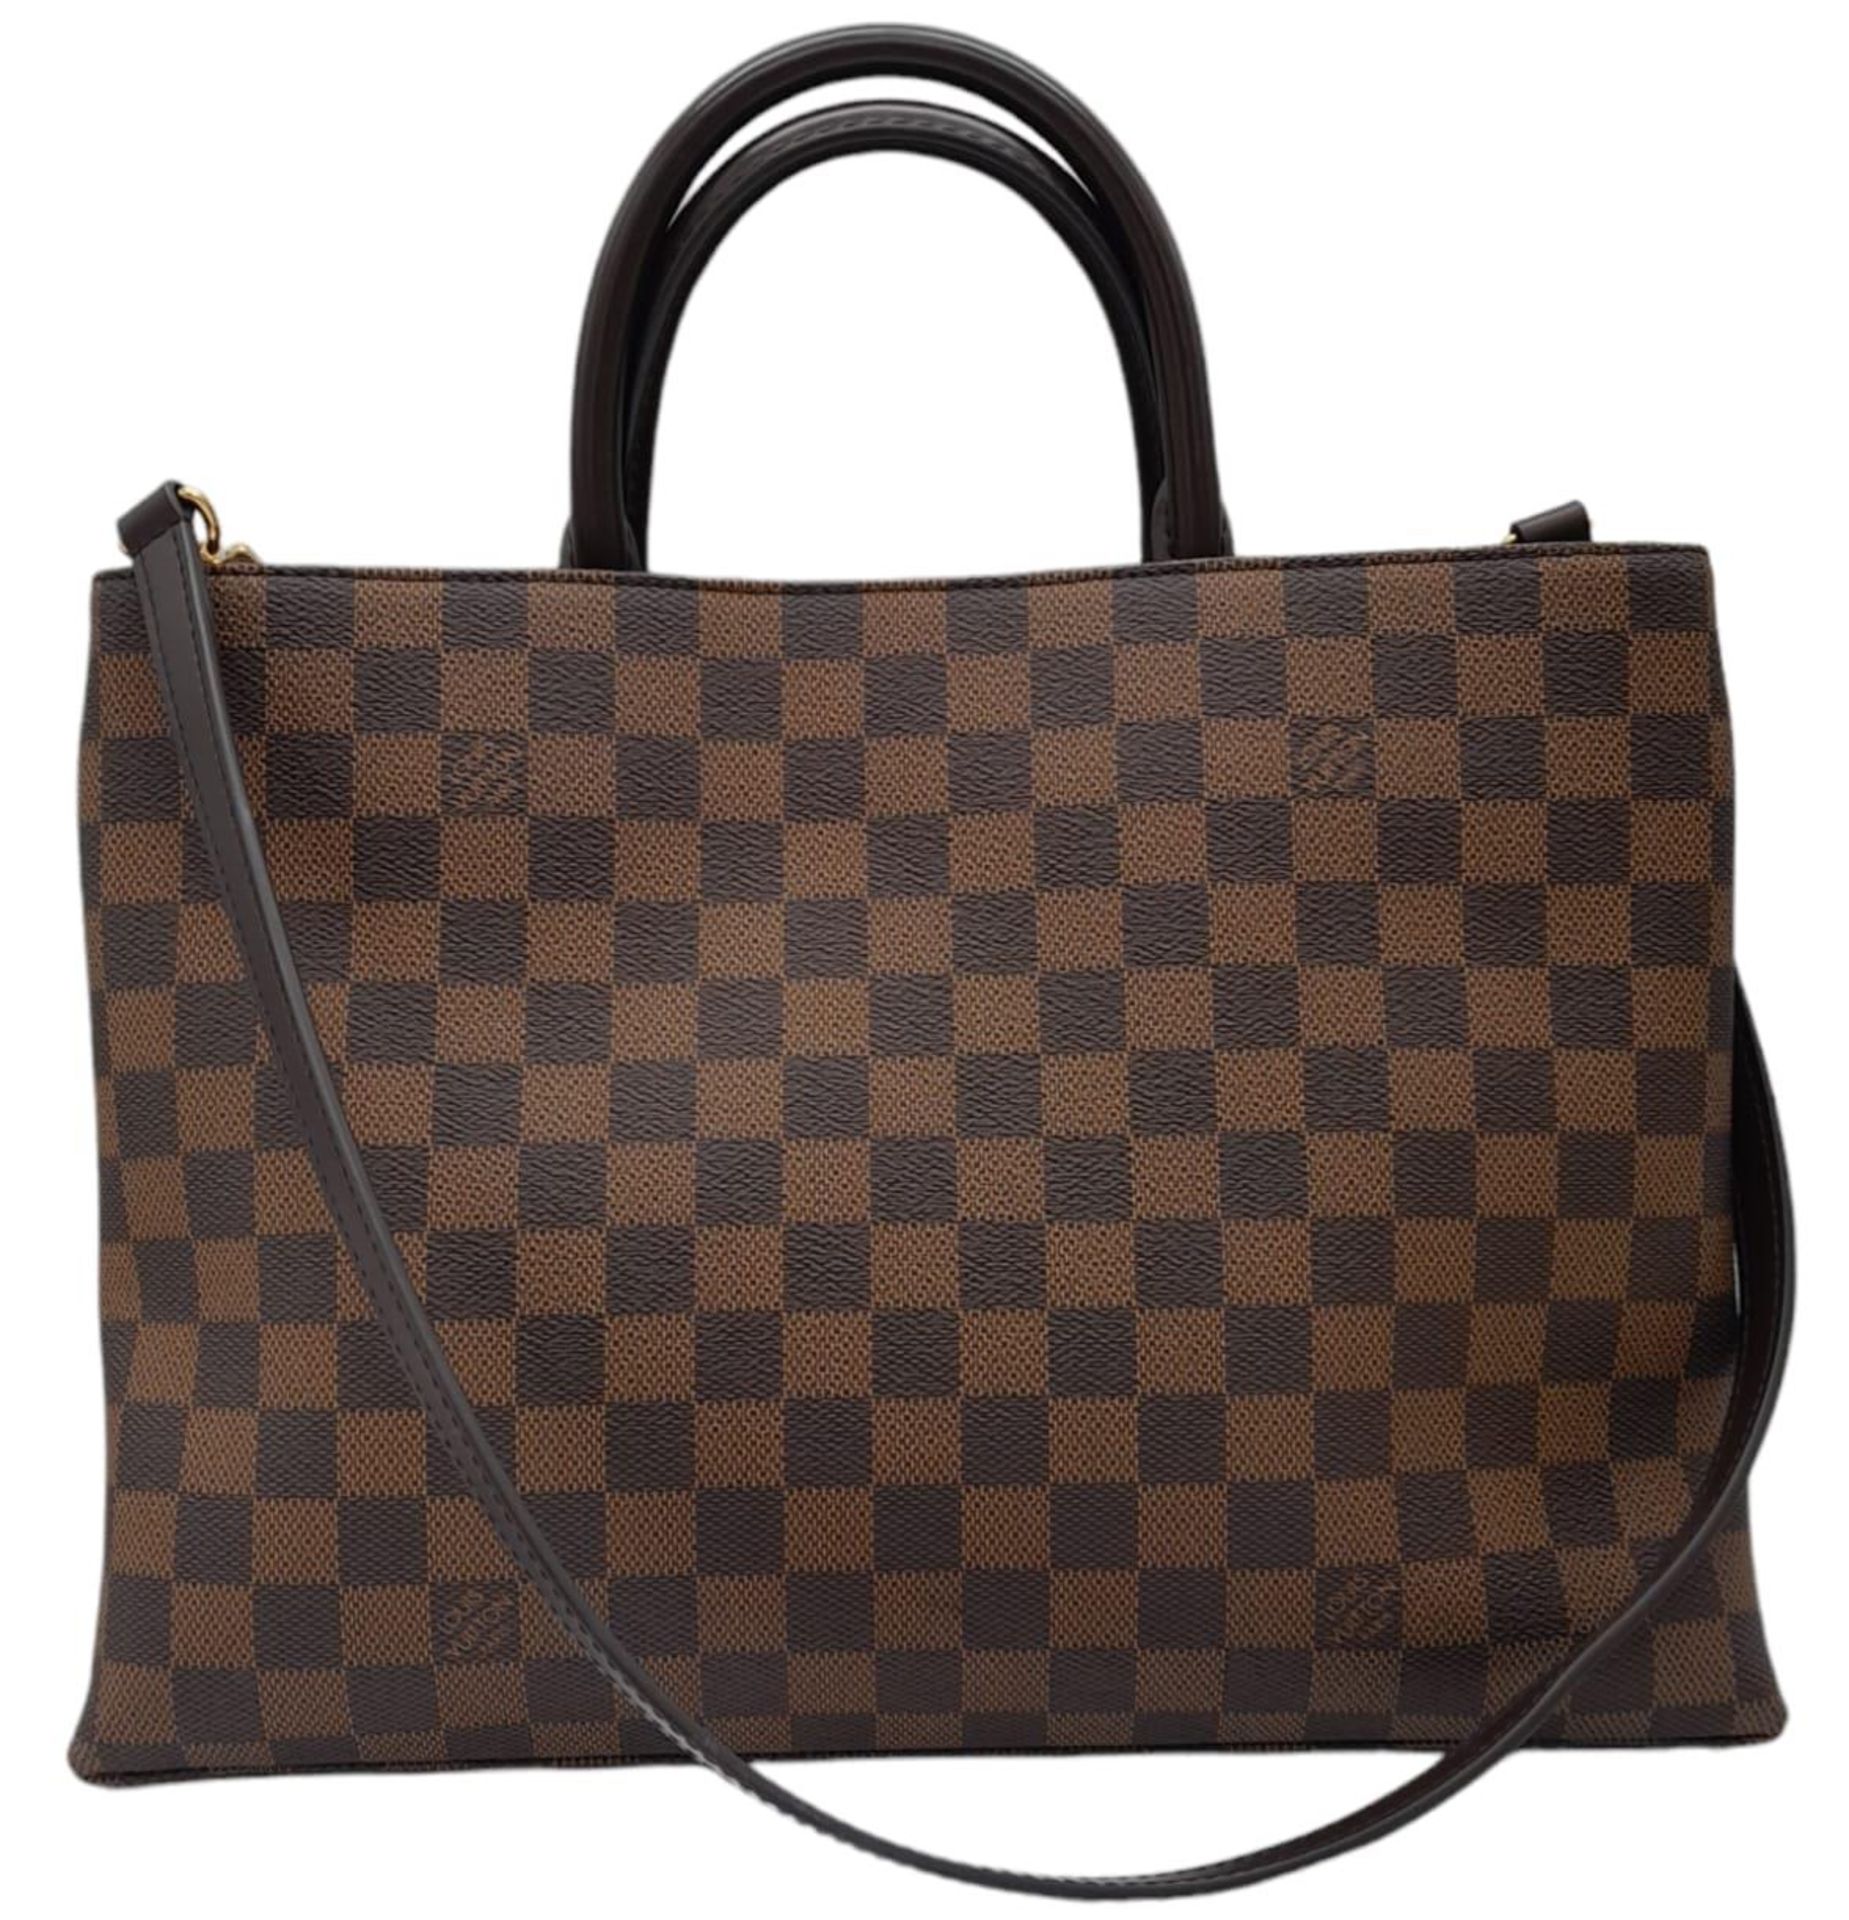 A Louis Vuitton Damier Ebene Brampton Handbag. Leather exterior with two rolled leather handles, - Image 4 of 11